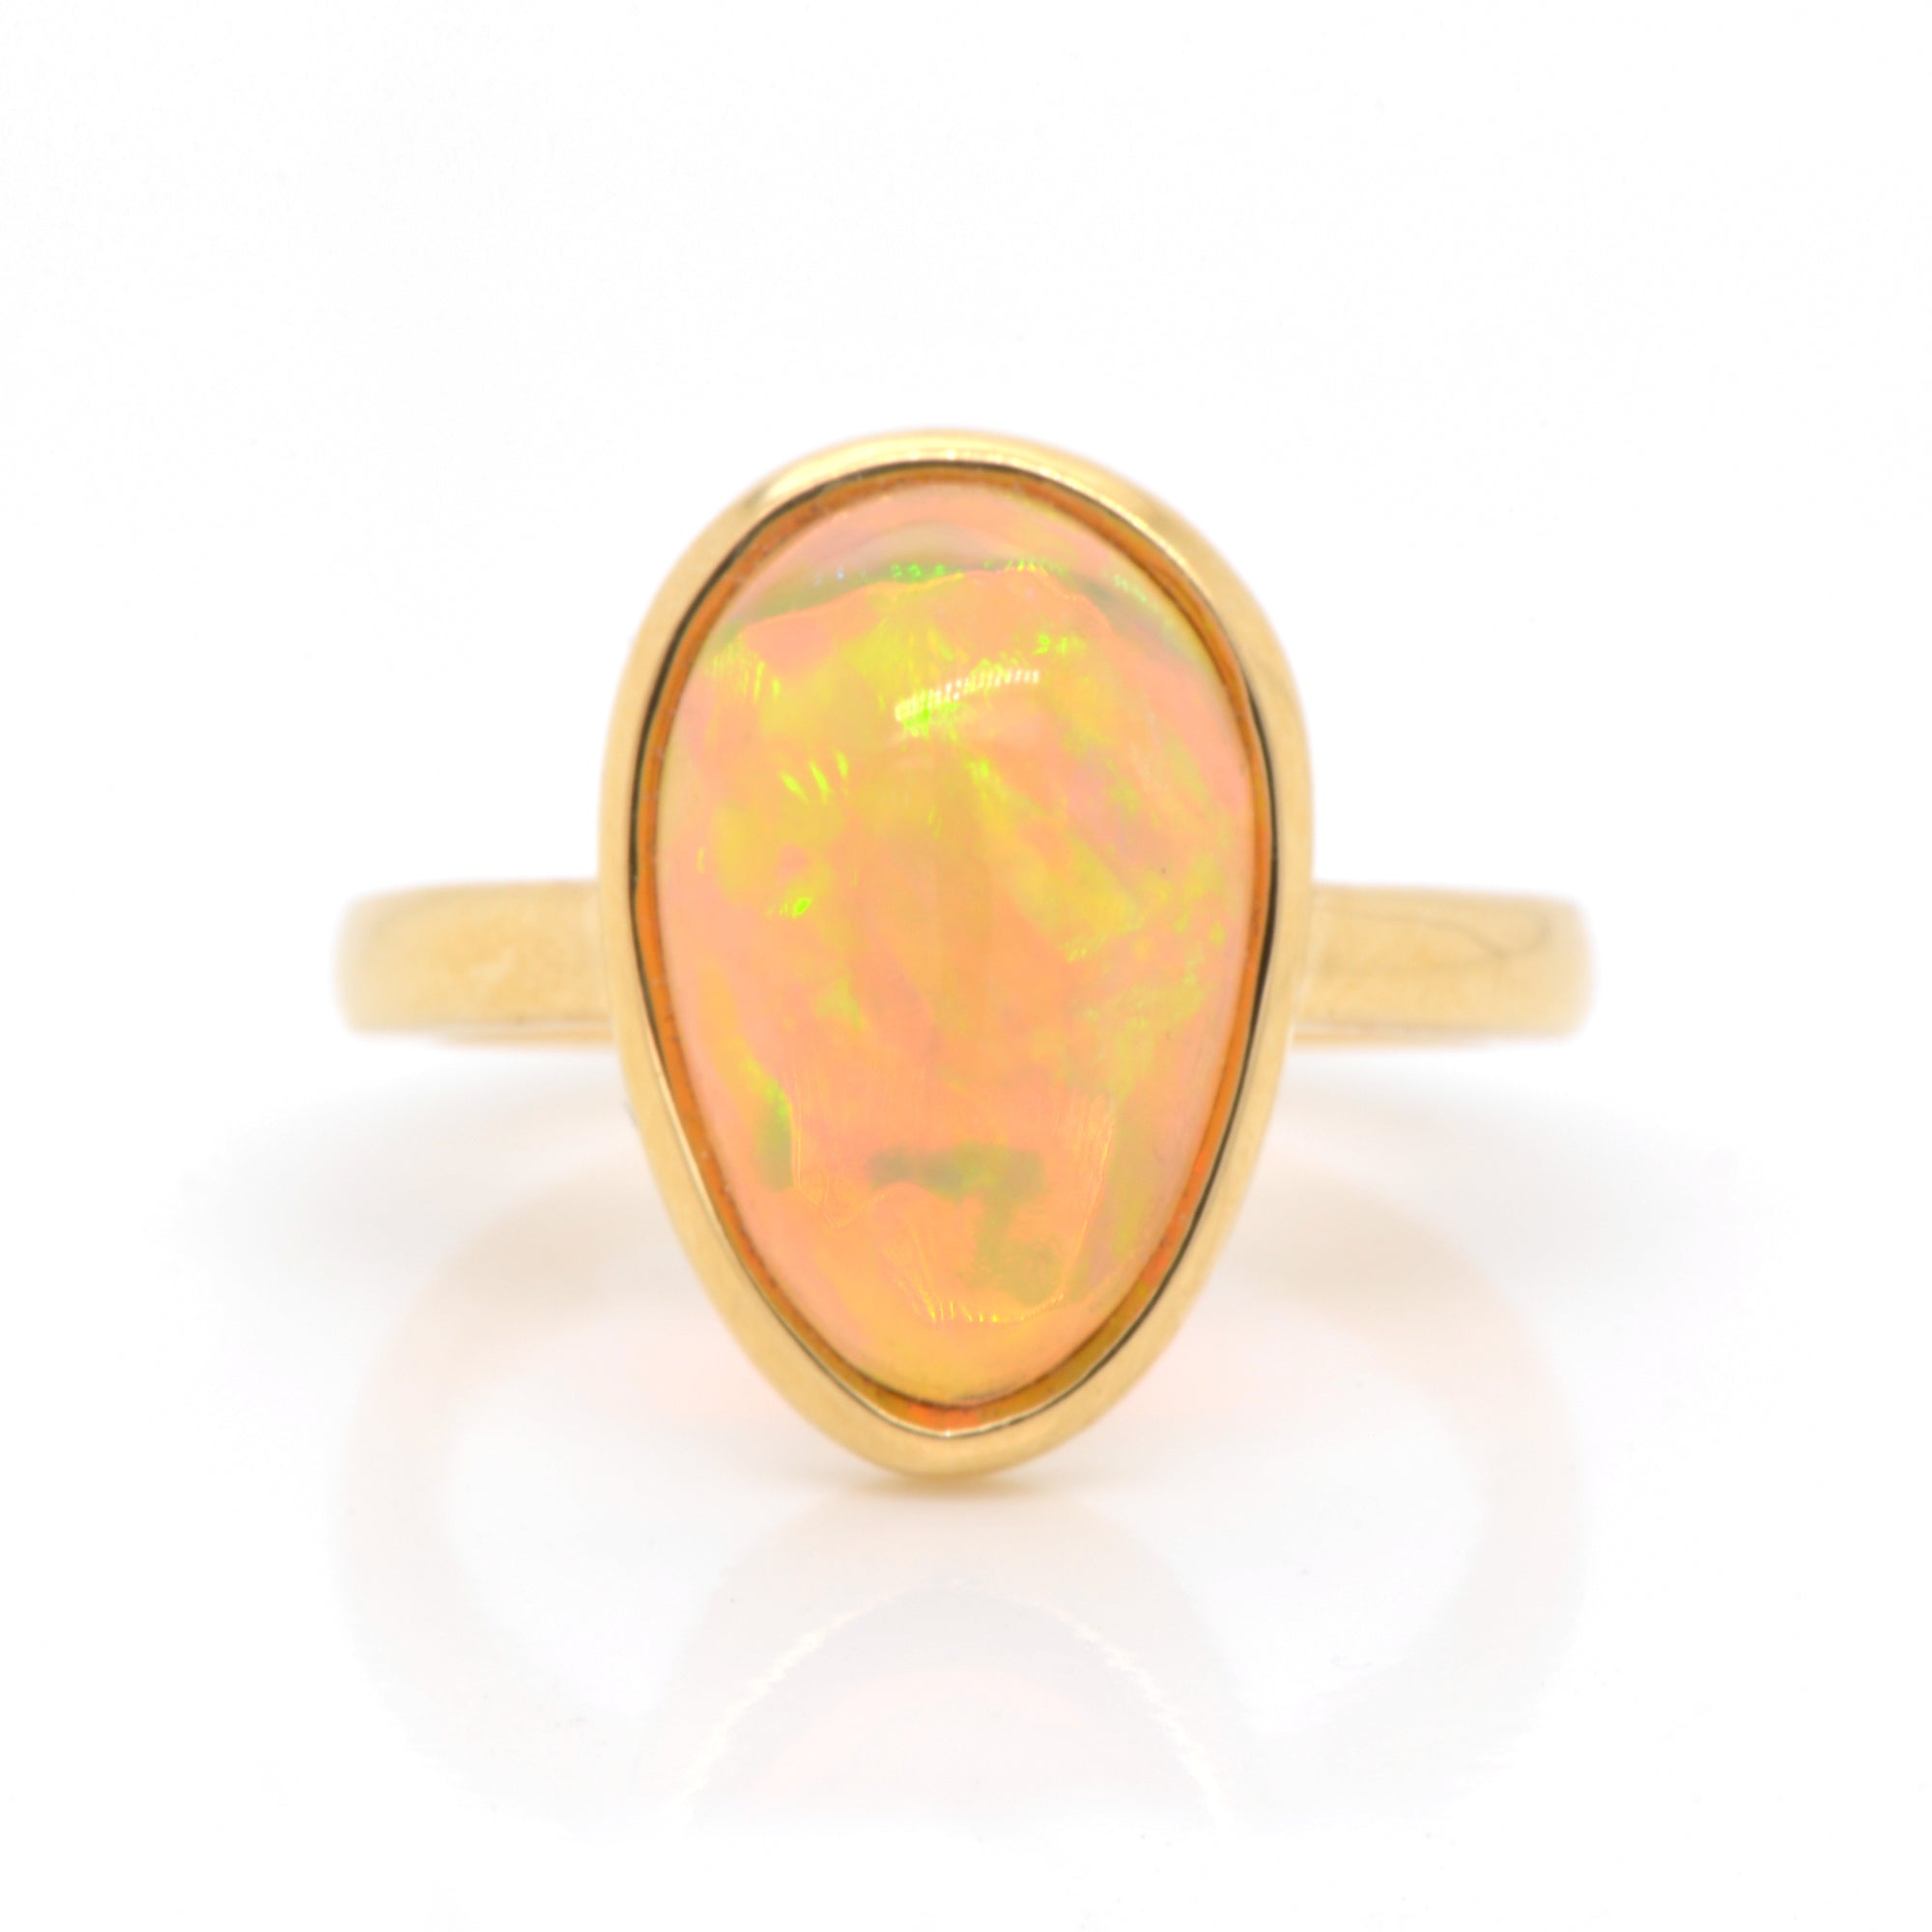 18K yellow gold opal ring featuring one pear-shaped Ethiopian opal weighing 3.52 carats. Judith Arnell Jewelers.